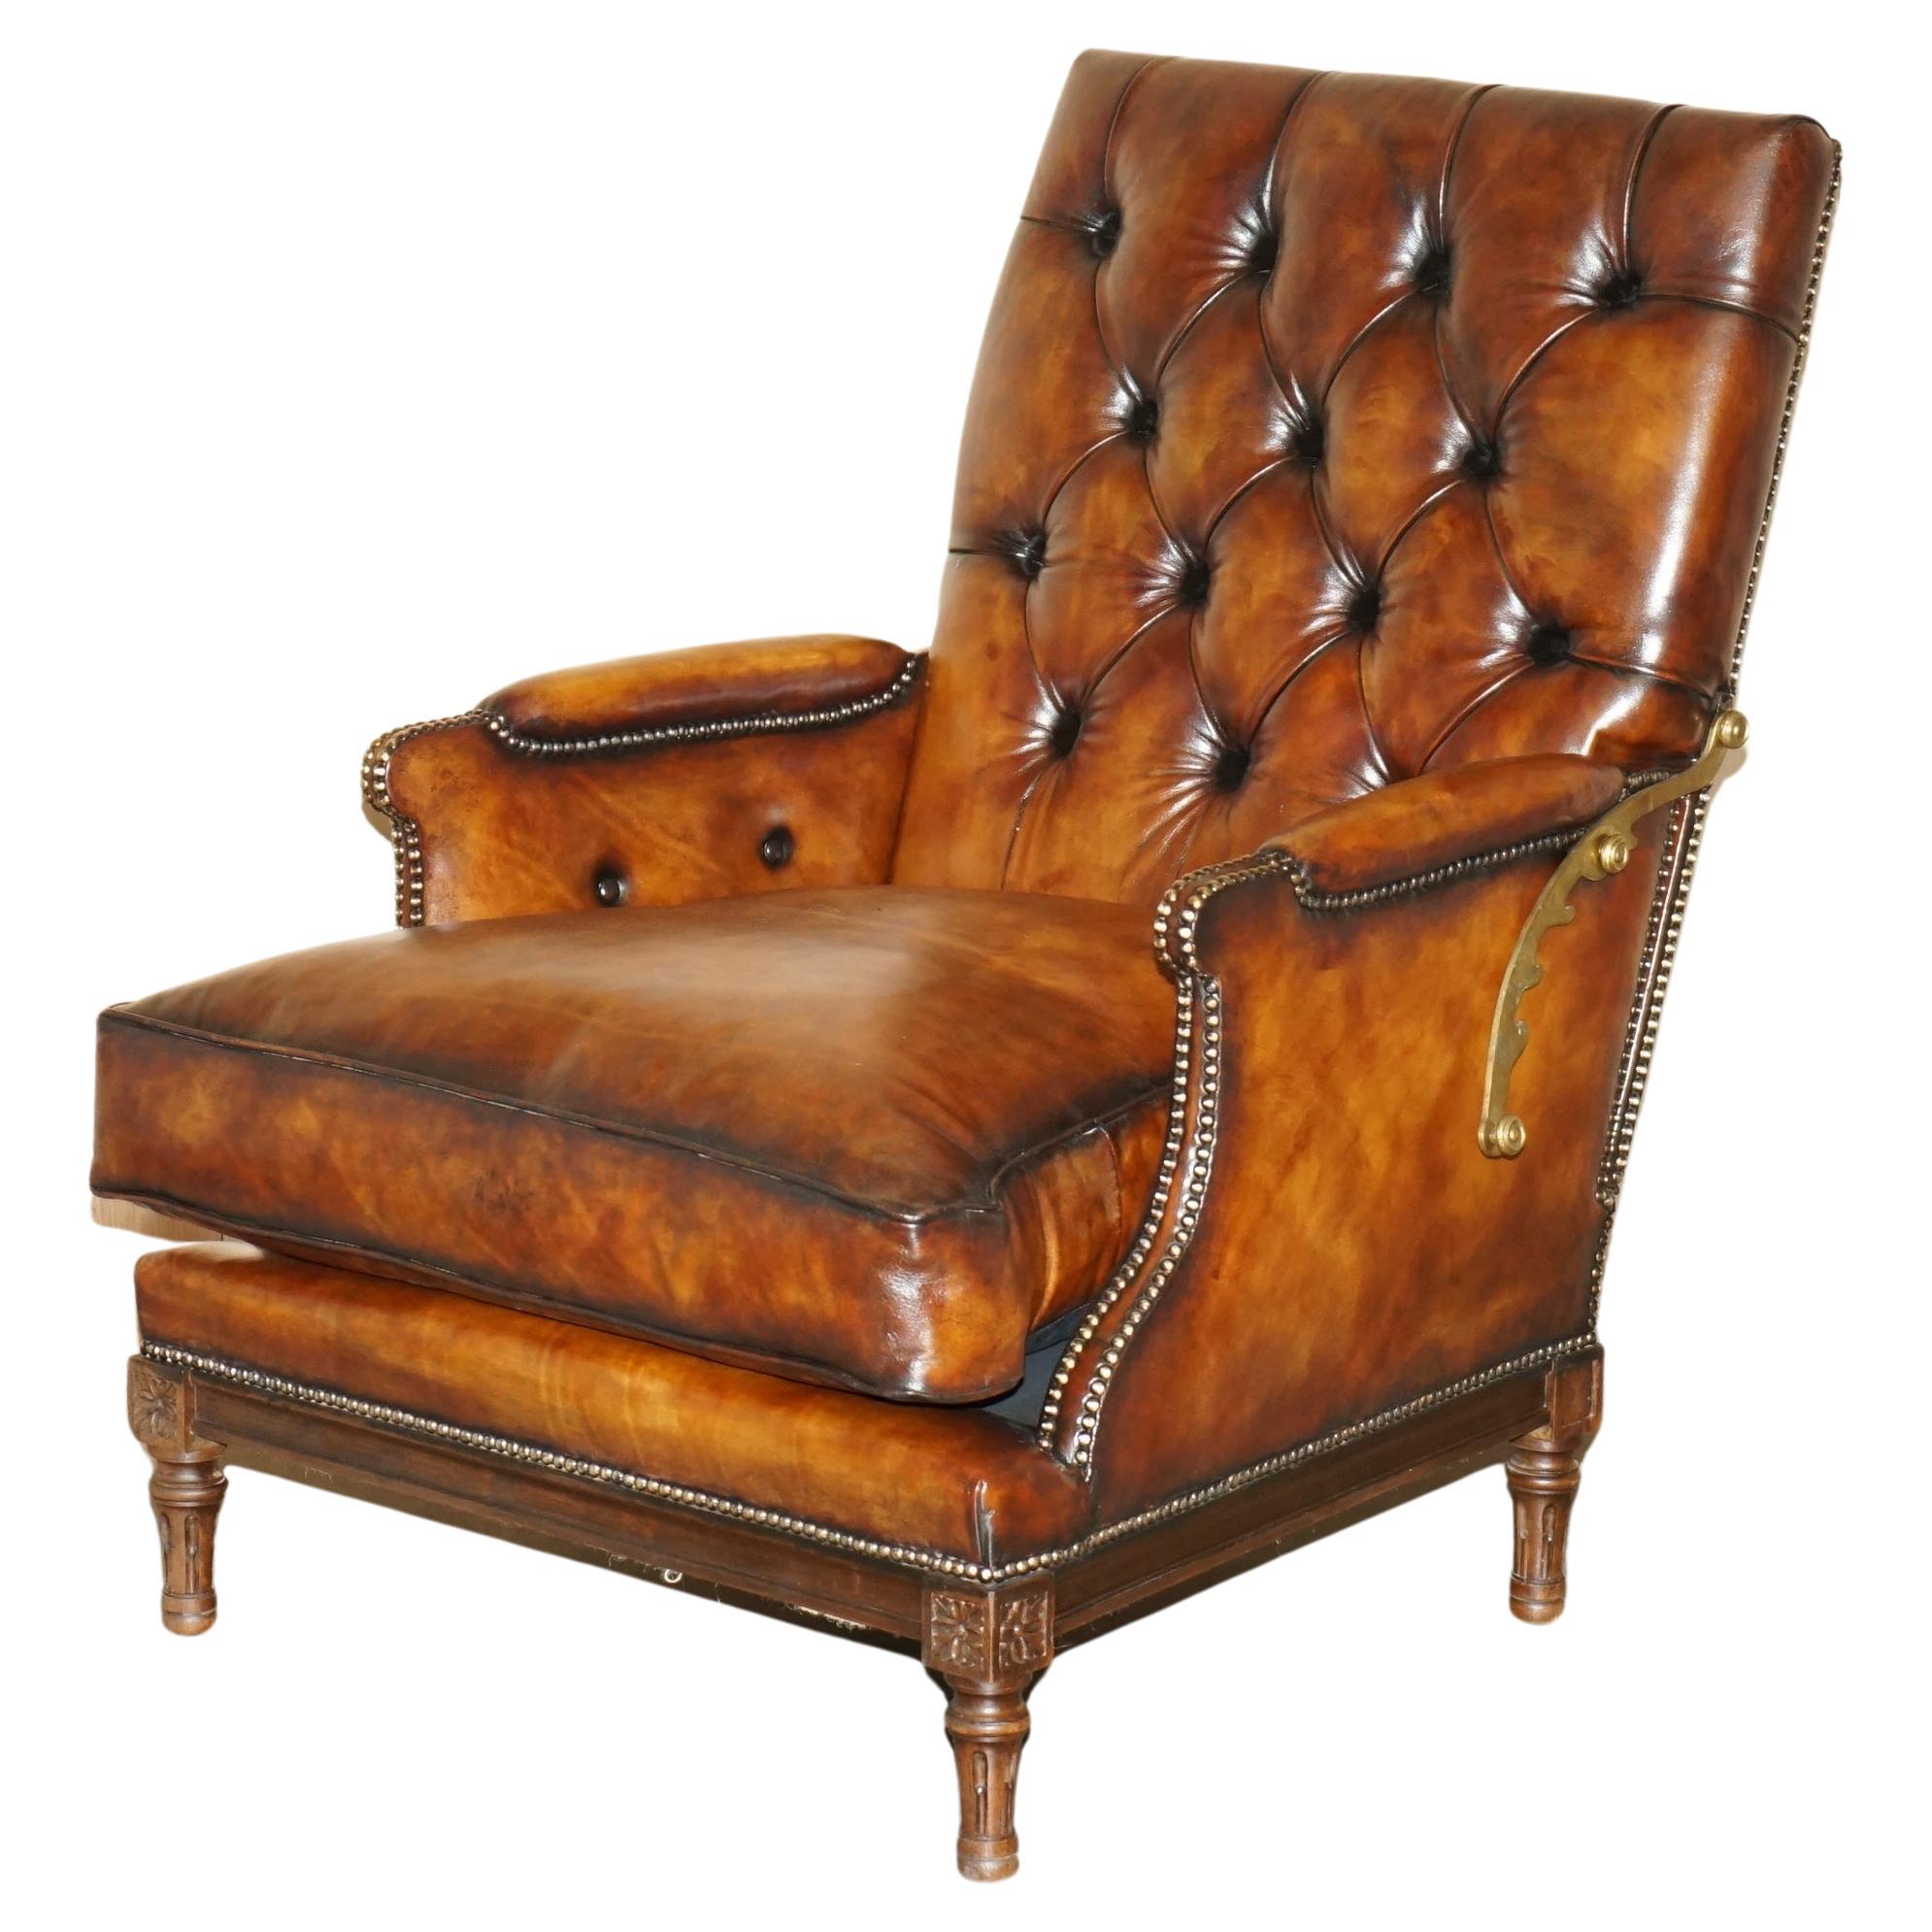 RESTORED CHESTERFIELD TUFTED HAND DYED BROWN LEATHER LIBRARY RECLINER ARMCHAiR